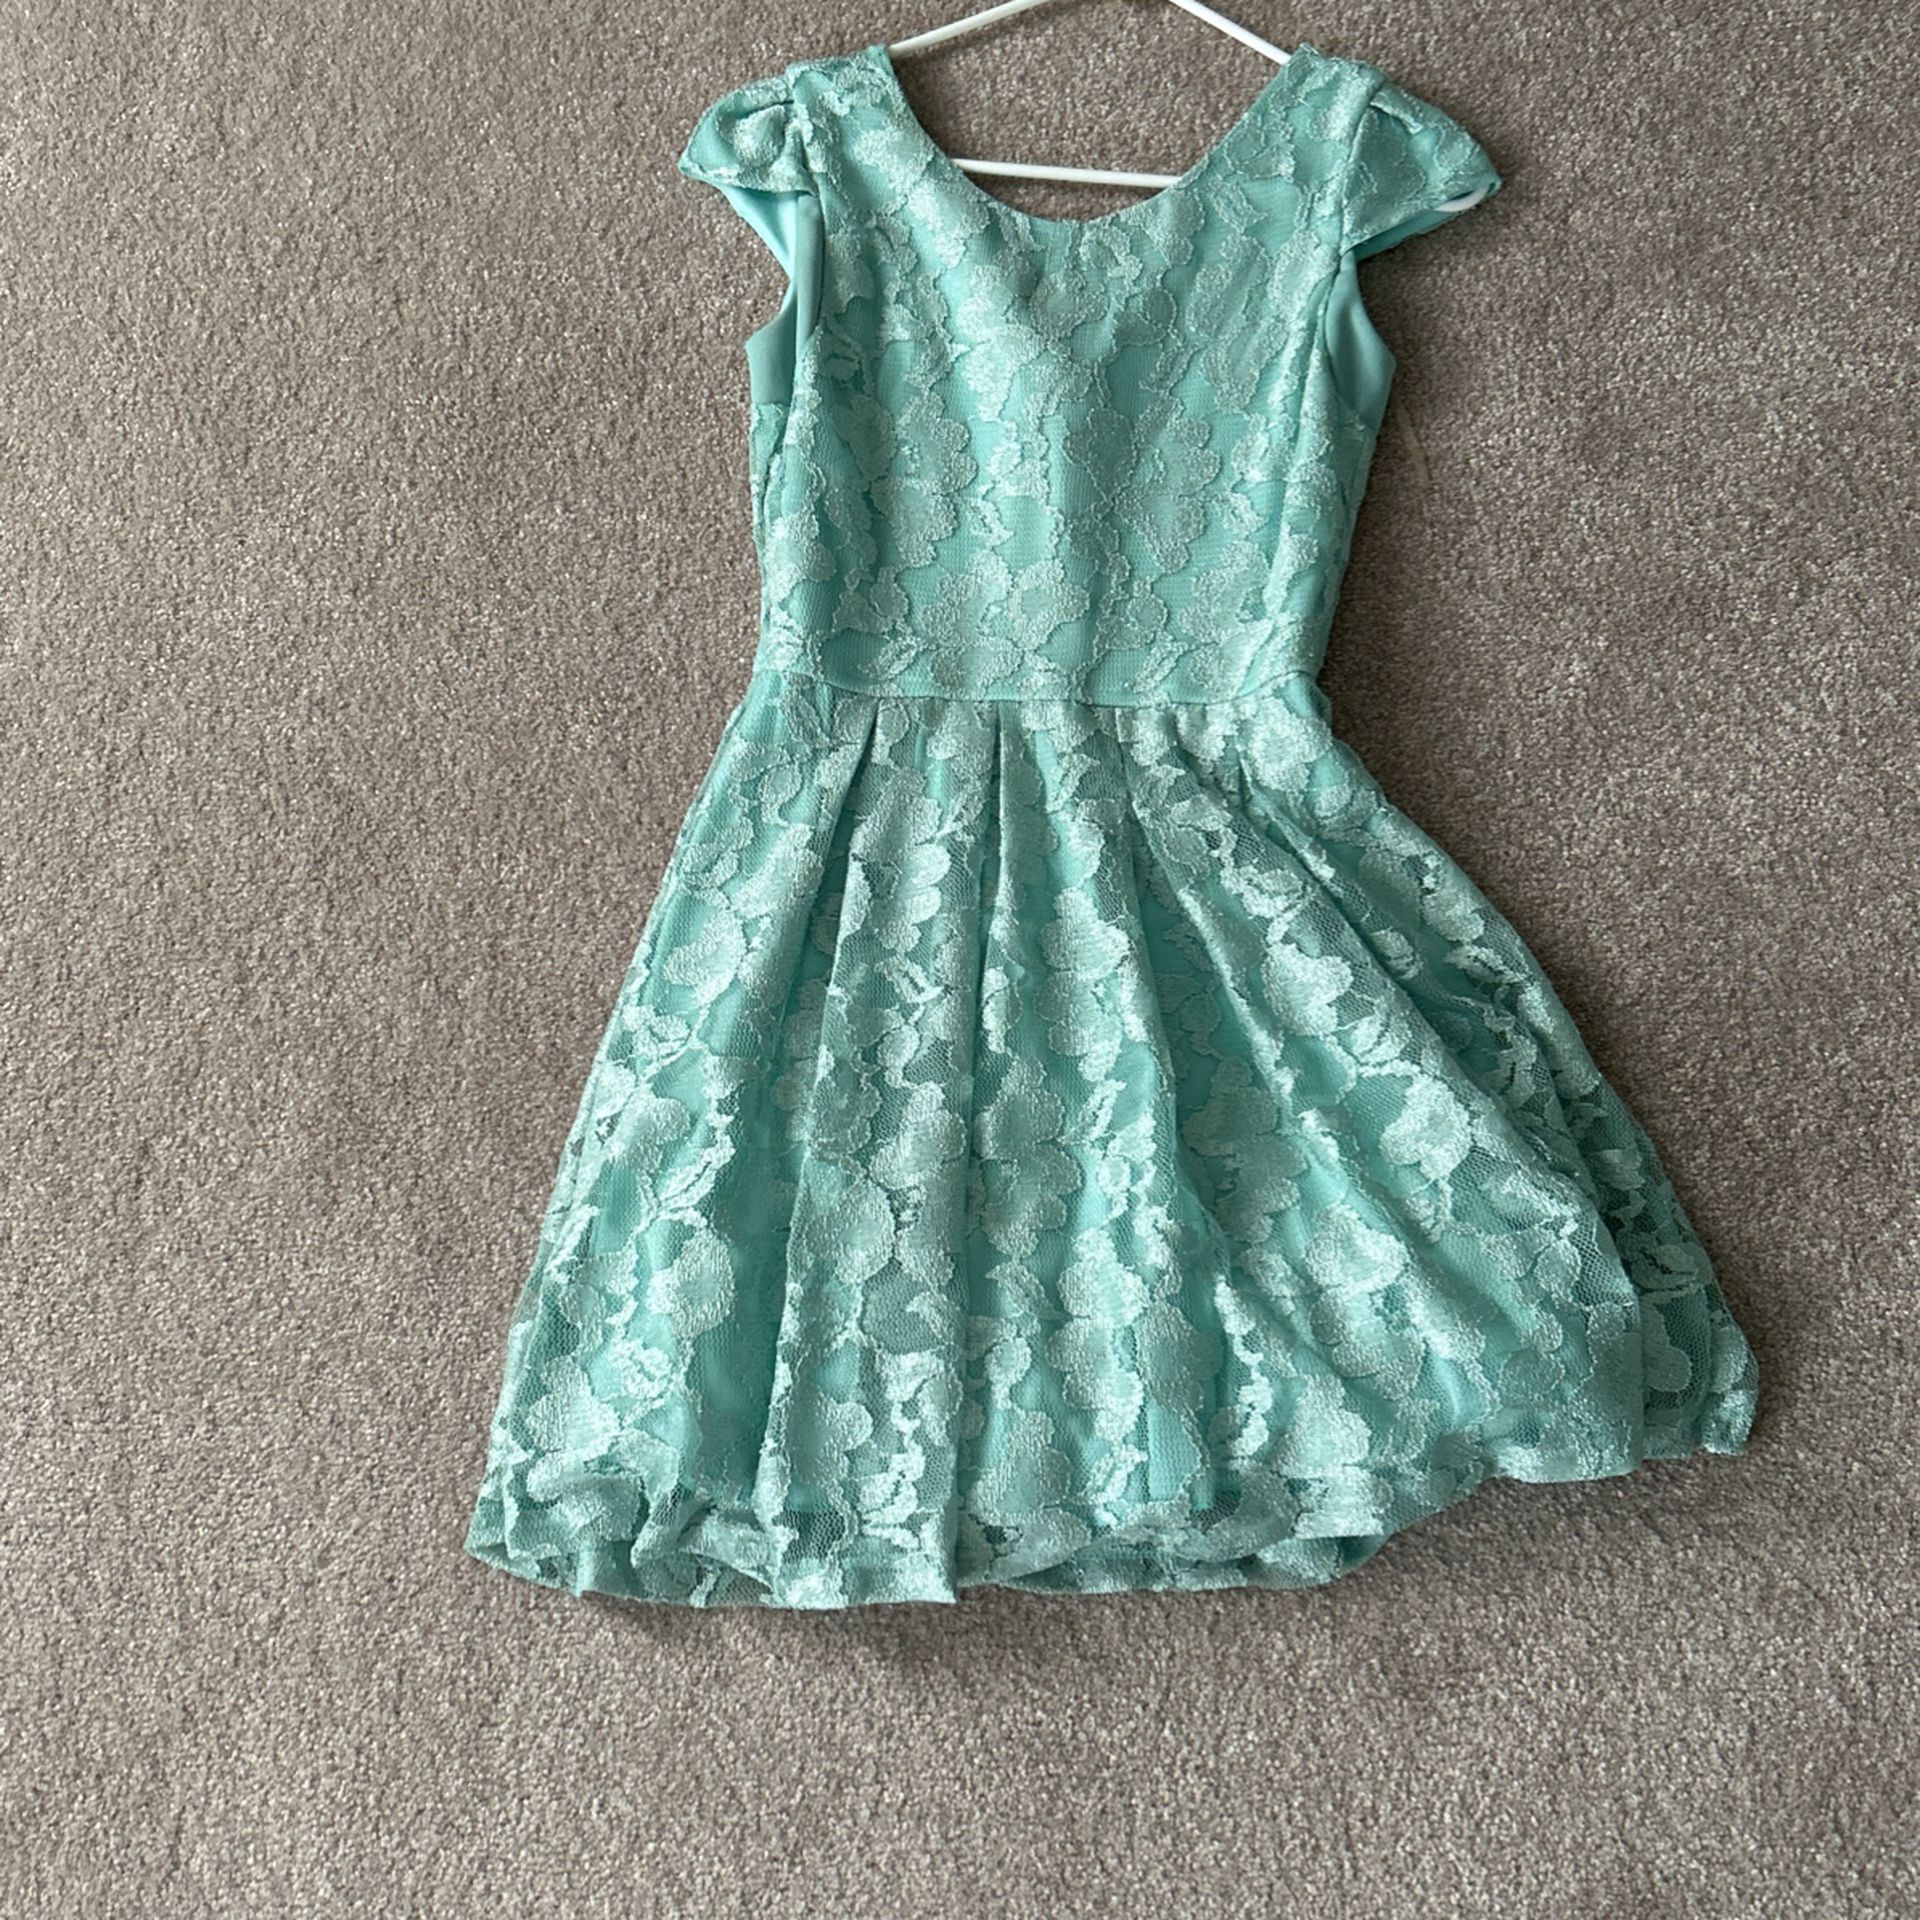 Size One Mint Green Cap Sleeve Lace Dress